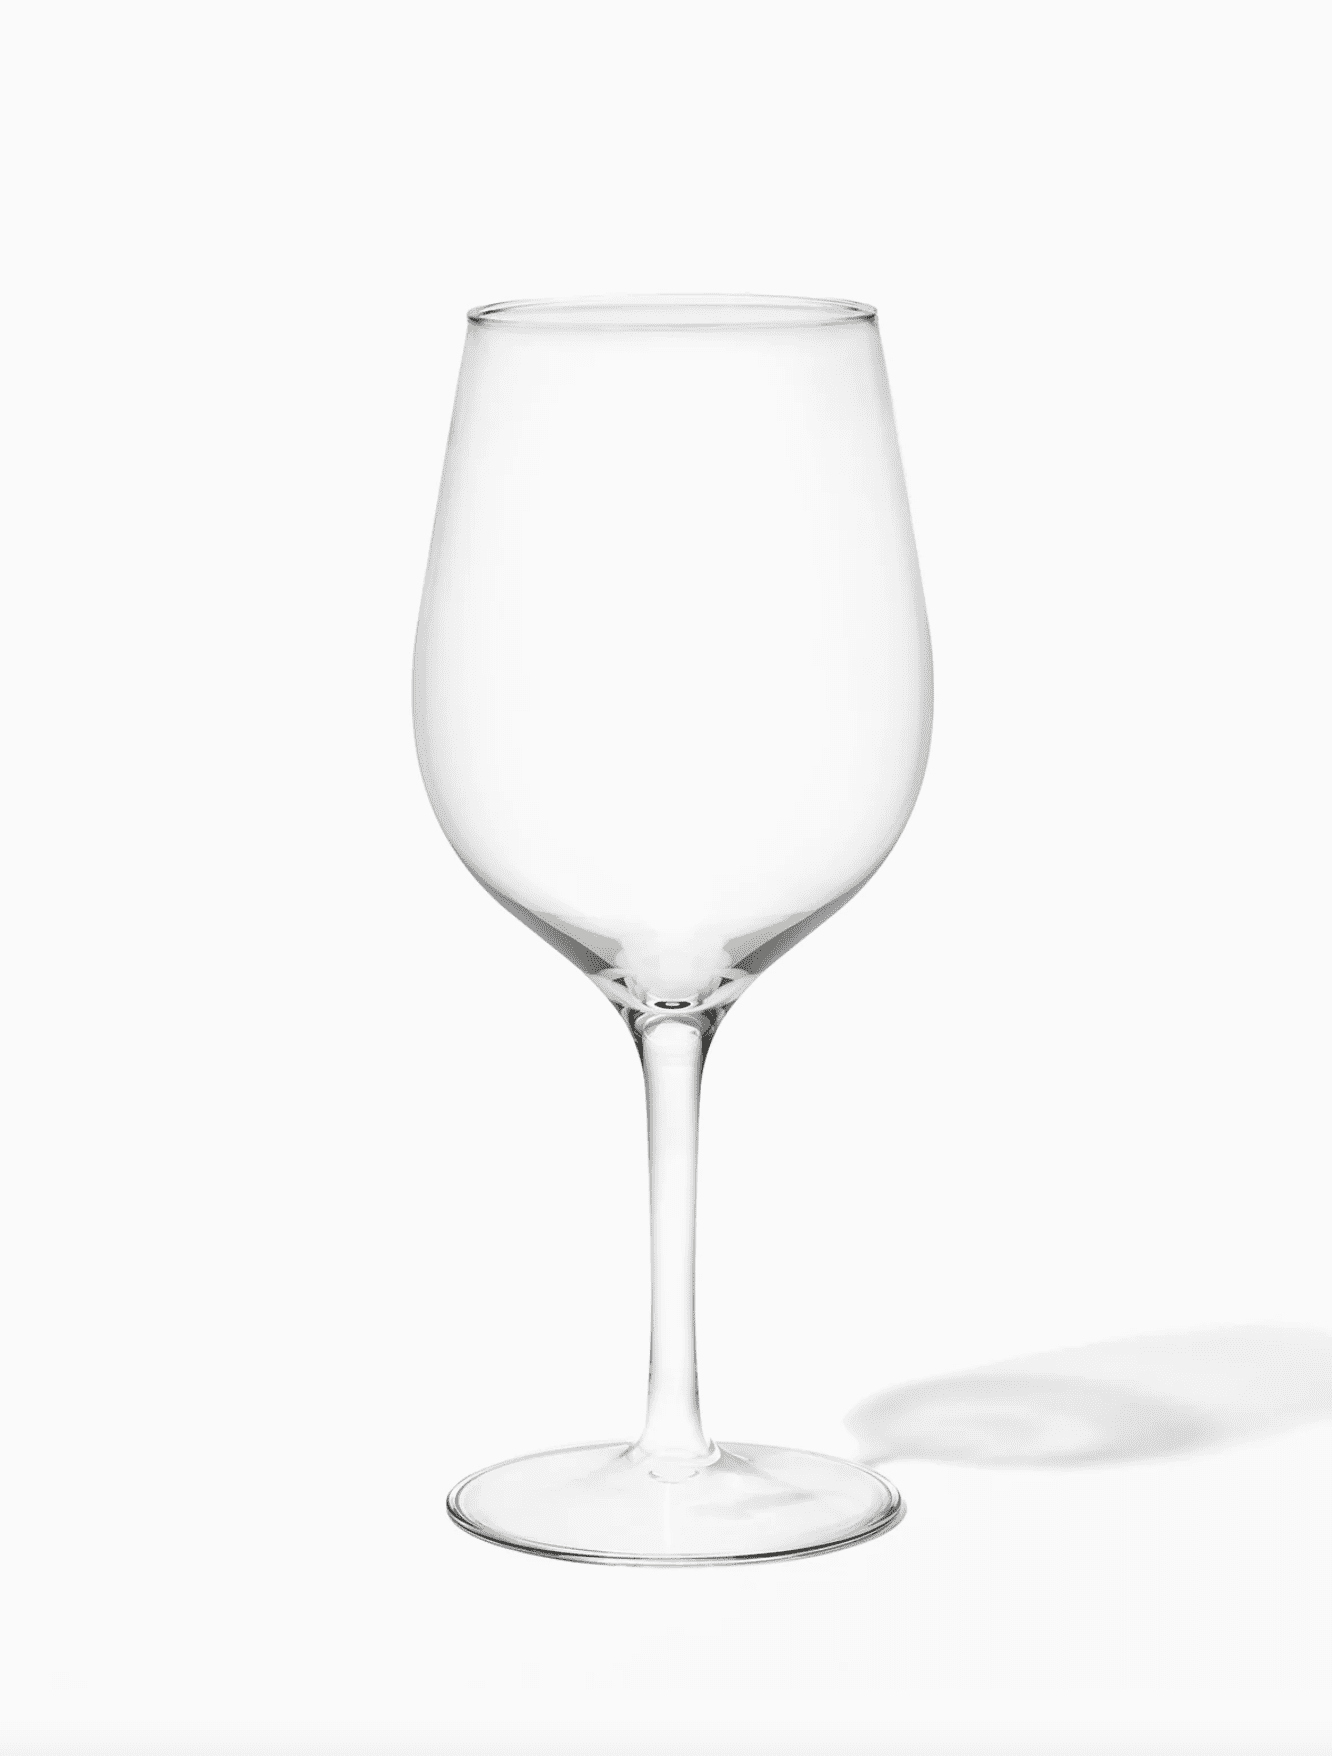 http://cdn.apartmenttherapy.info/image/upload/v1690319935/gen-workflow/product-database/Tossware_RESERVE_14oz_WineGlass.png